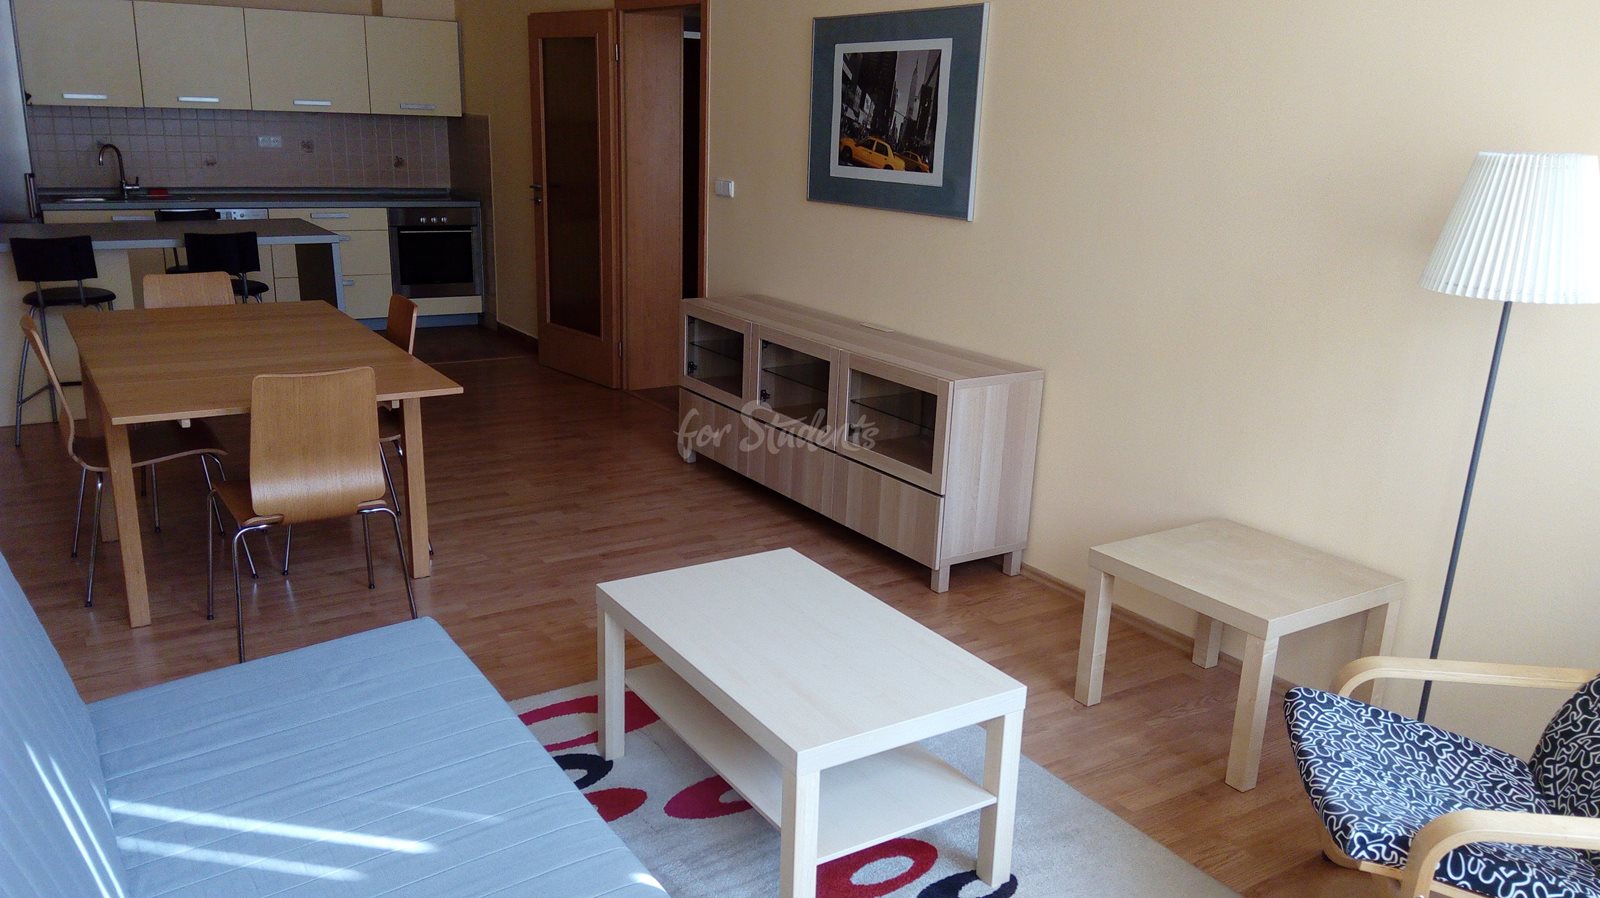 Spacious one bedroom apartment in the Old Town, Hradec Králové